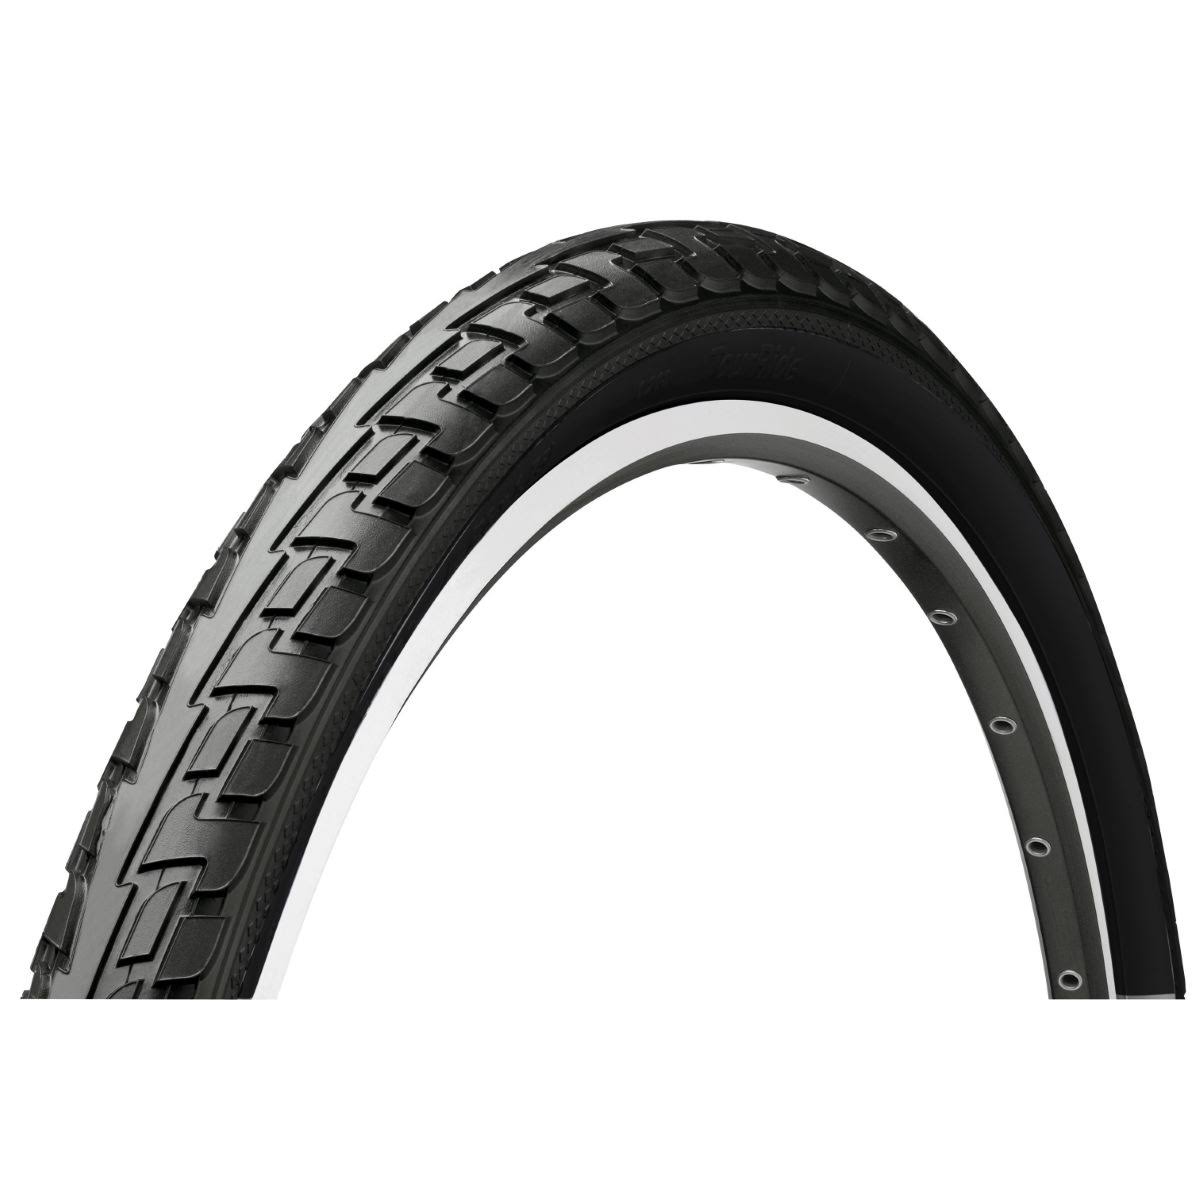 Continental Tour Ride Cross Hybrid Bicycle Tire - Wire Bead, 700 x 28c